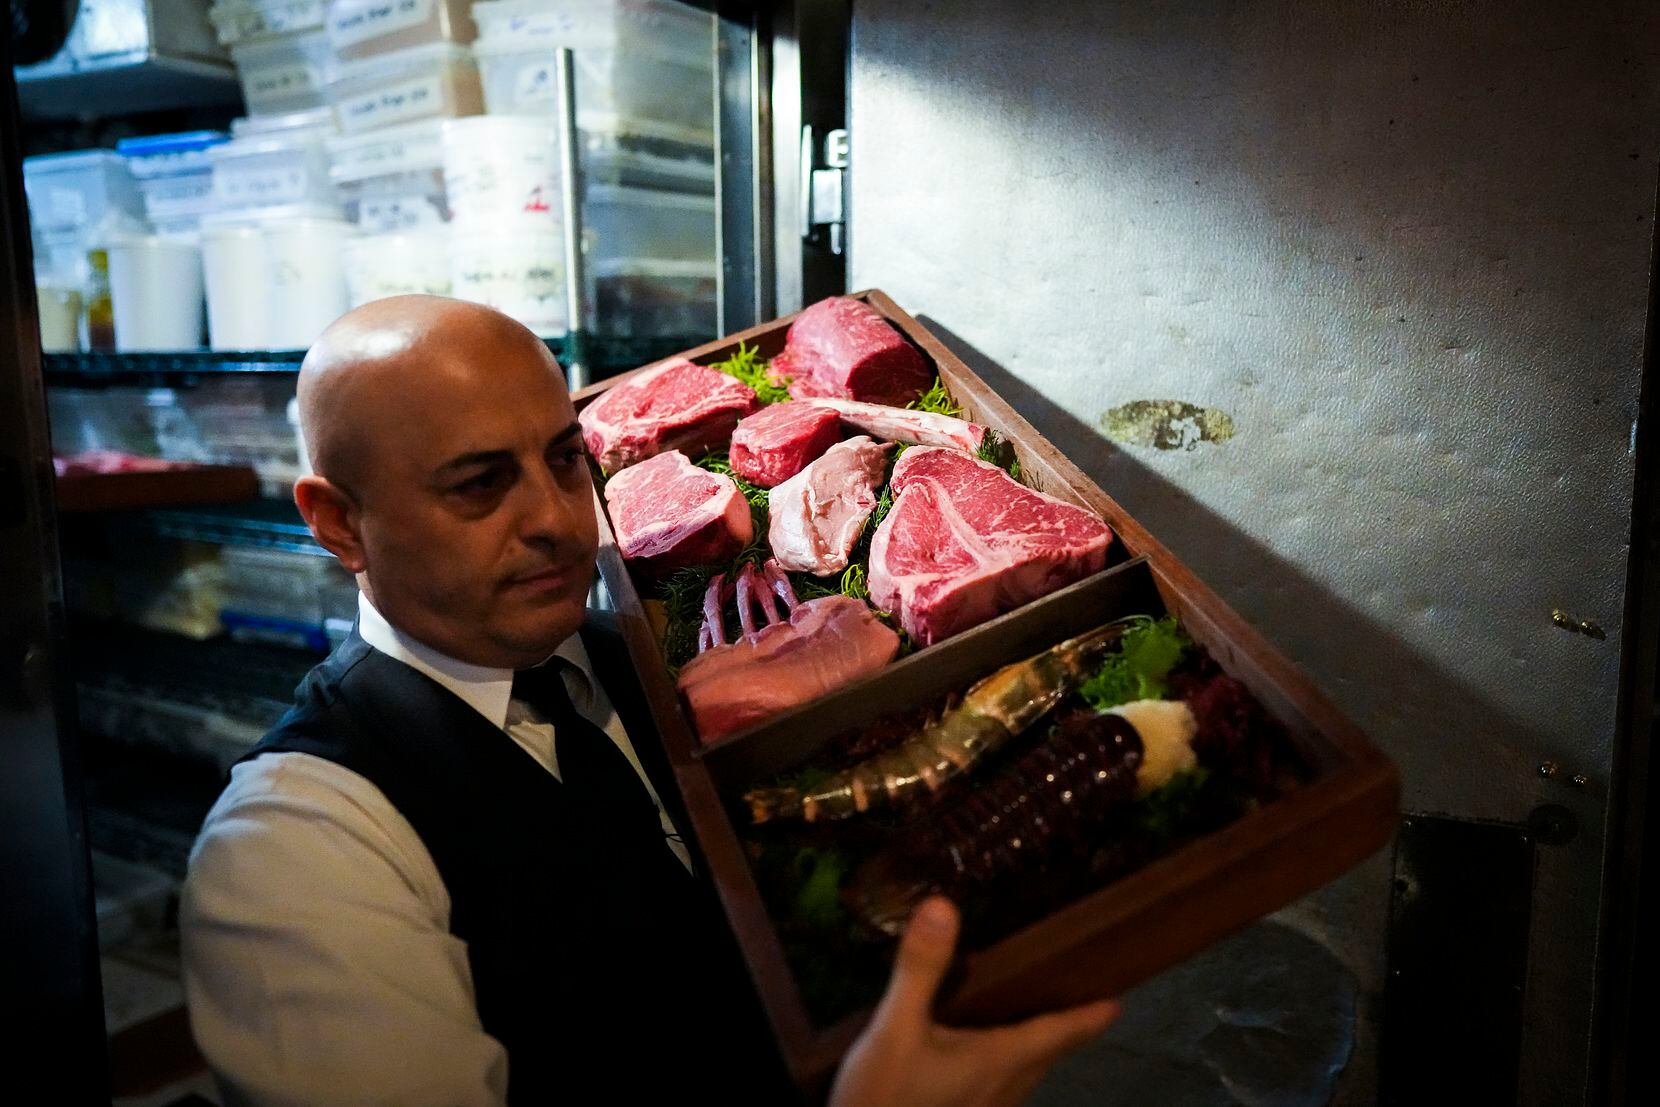 Benny carries a display of steaks and seafood from a refrigerator at Nick & Sam's.